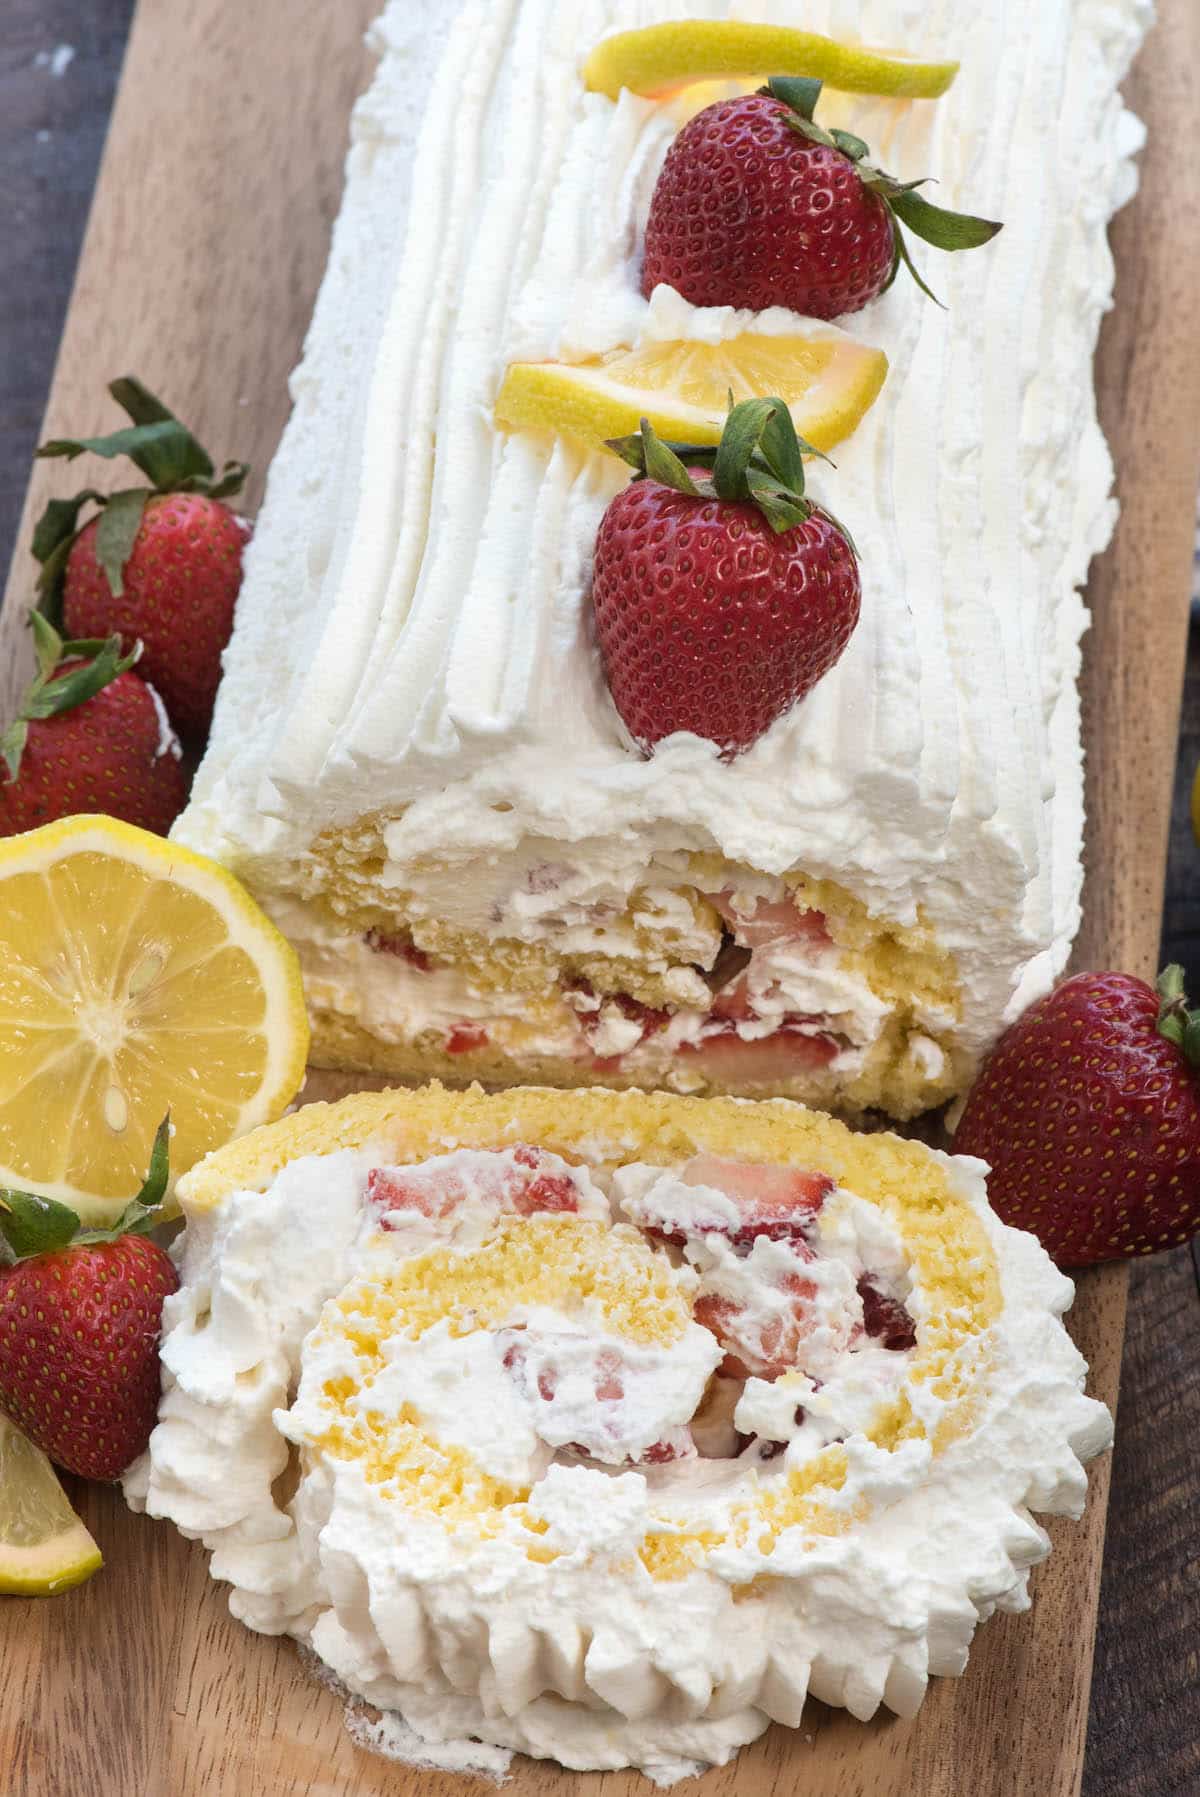 cake roll covered in white frosting with lemon slices and strawberries laid on top.